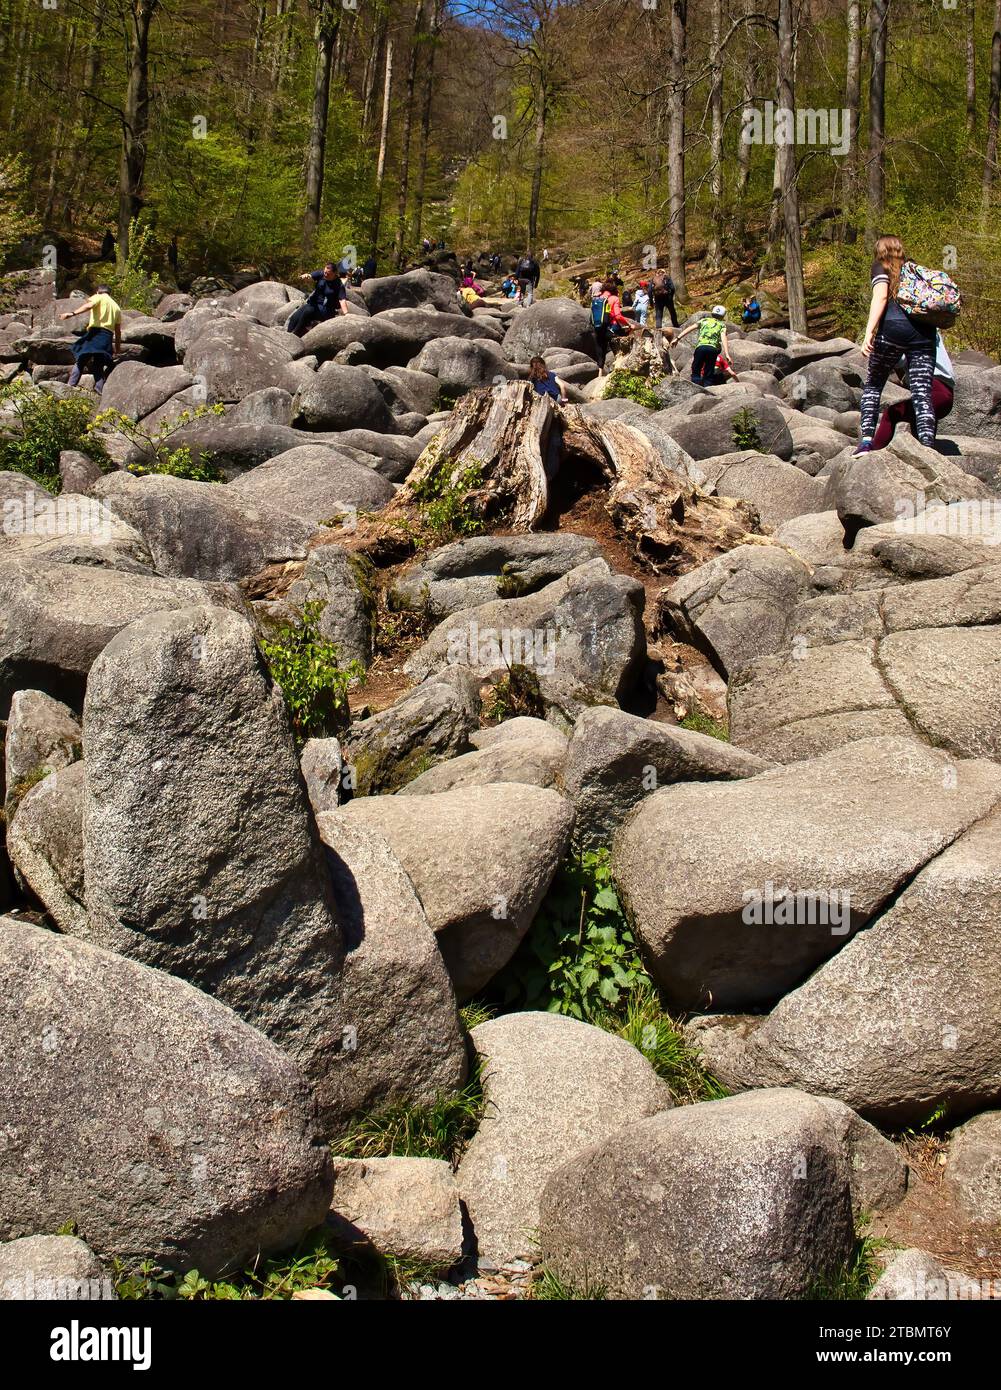 Lautertal, Germany - April 24, 2021: People climbing on rocks on a hill at Felsenmeer on a spring day in Germany. Stock Photo